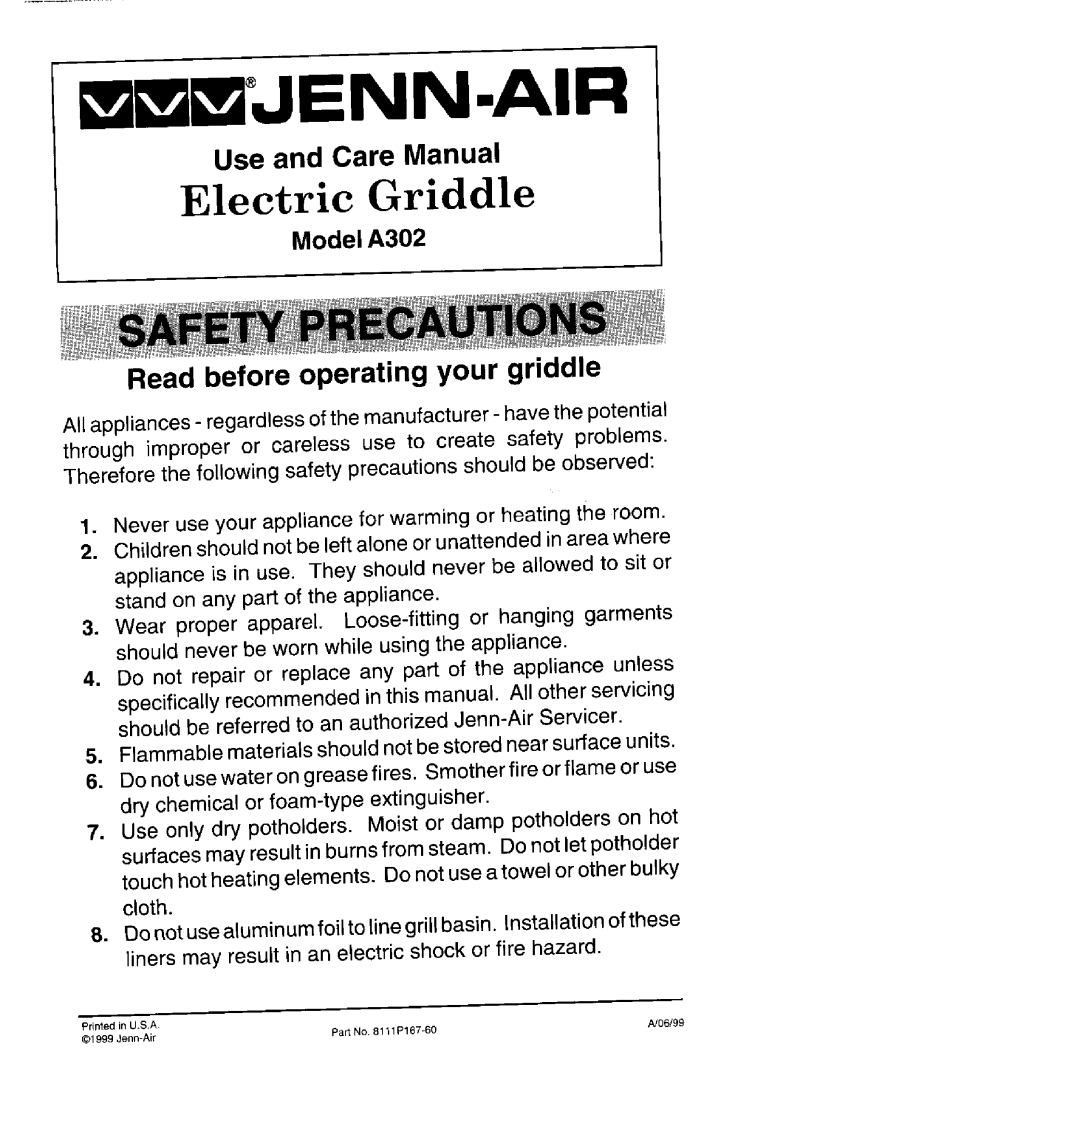 Jenn-Air A302 manual mJENN.AIR, Electric Griddle, Use and Care Manual, Read before operating your griddle 